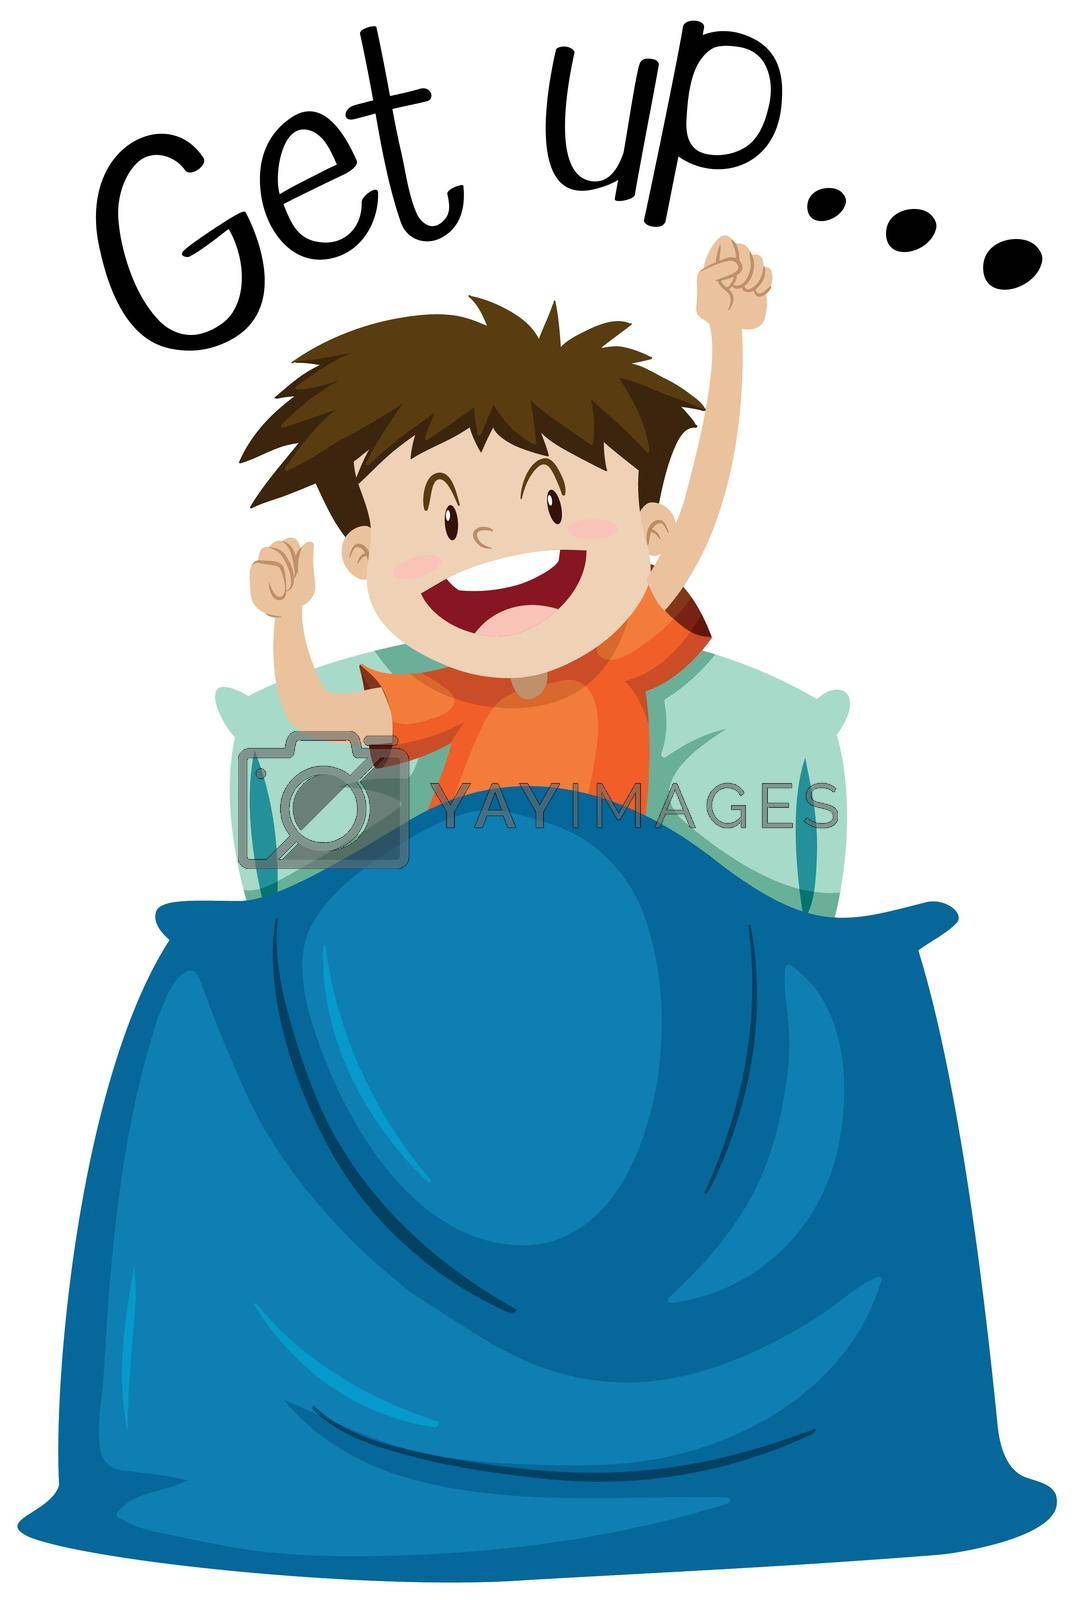 Royalty free image of Wordcard for get up with boy getting up by iimages